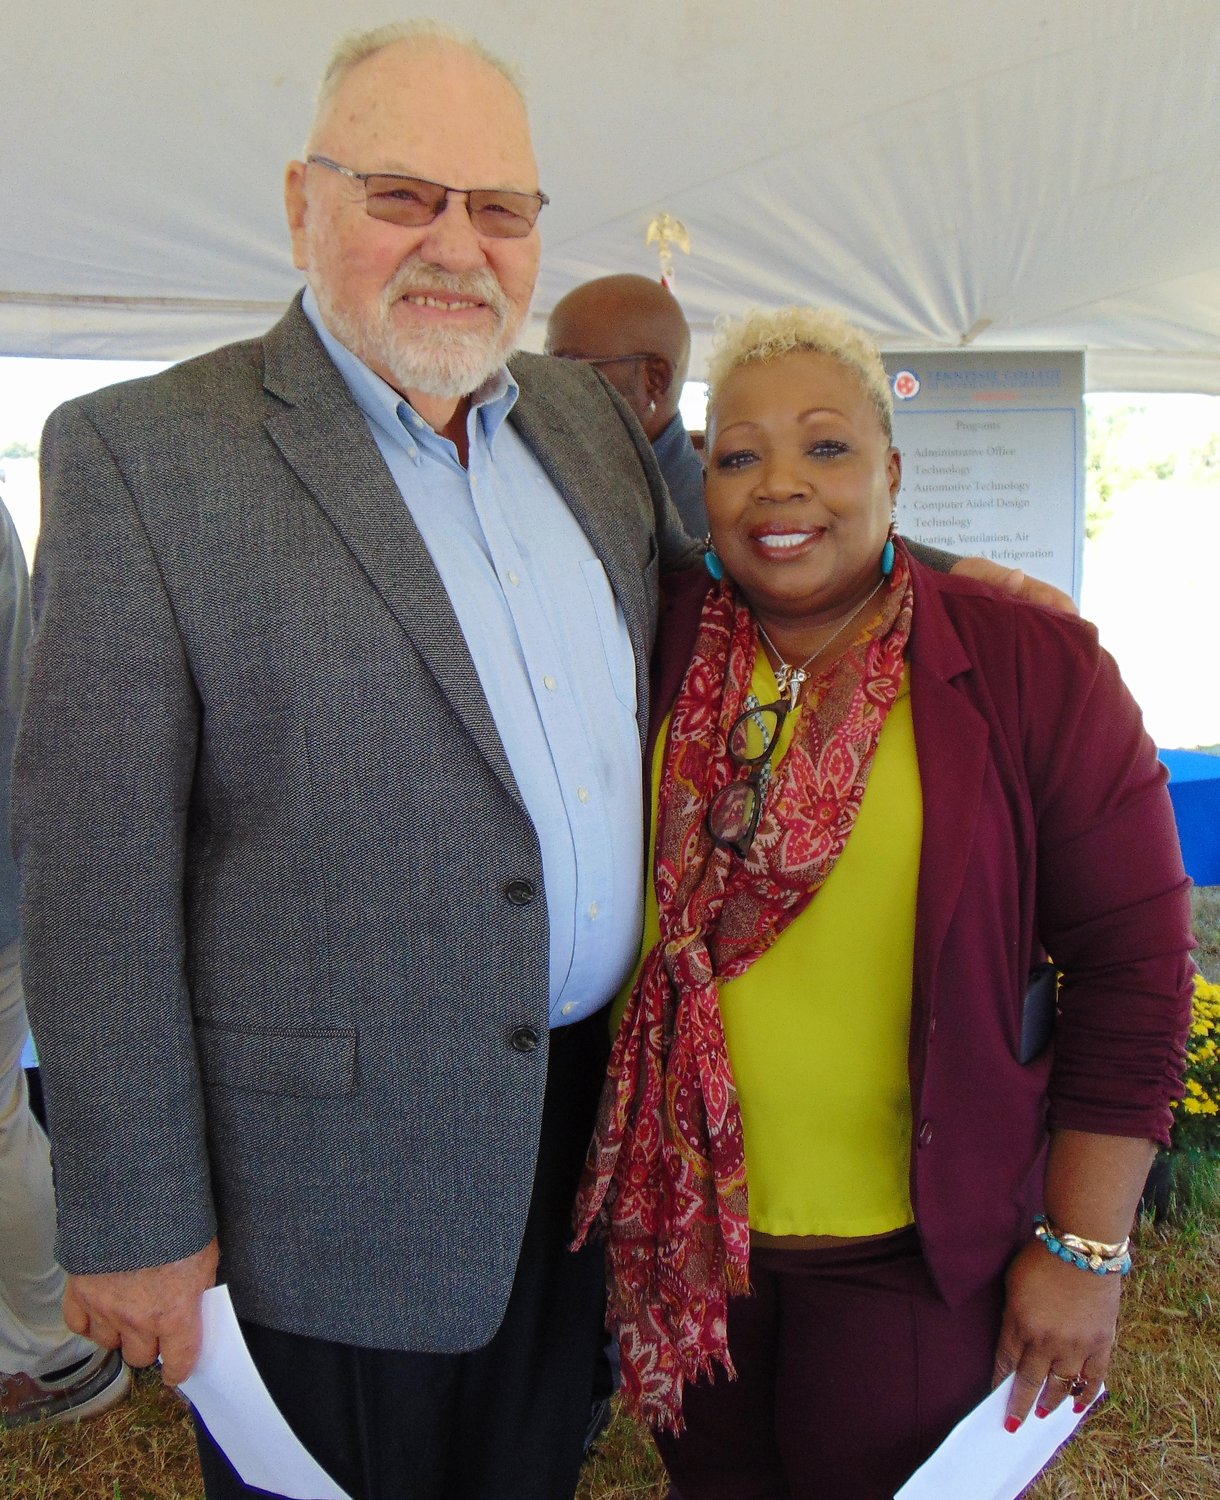 Former TCAT educator and director Ron Adcock, spends a moment with Brenda Cannon, director of community relations at Motlow College, during Friday’s TCAT-Shelbyville groundbreaking event.